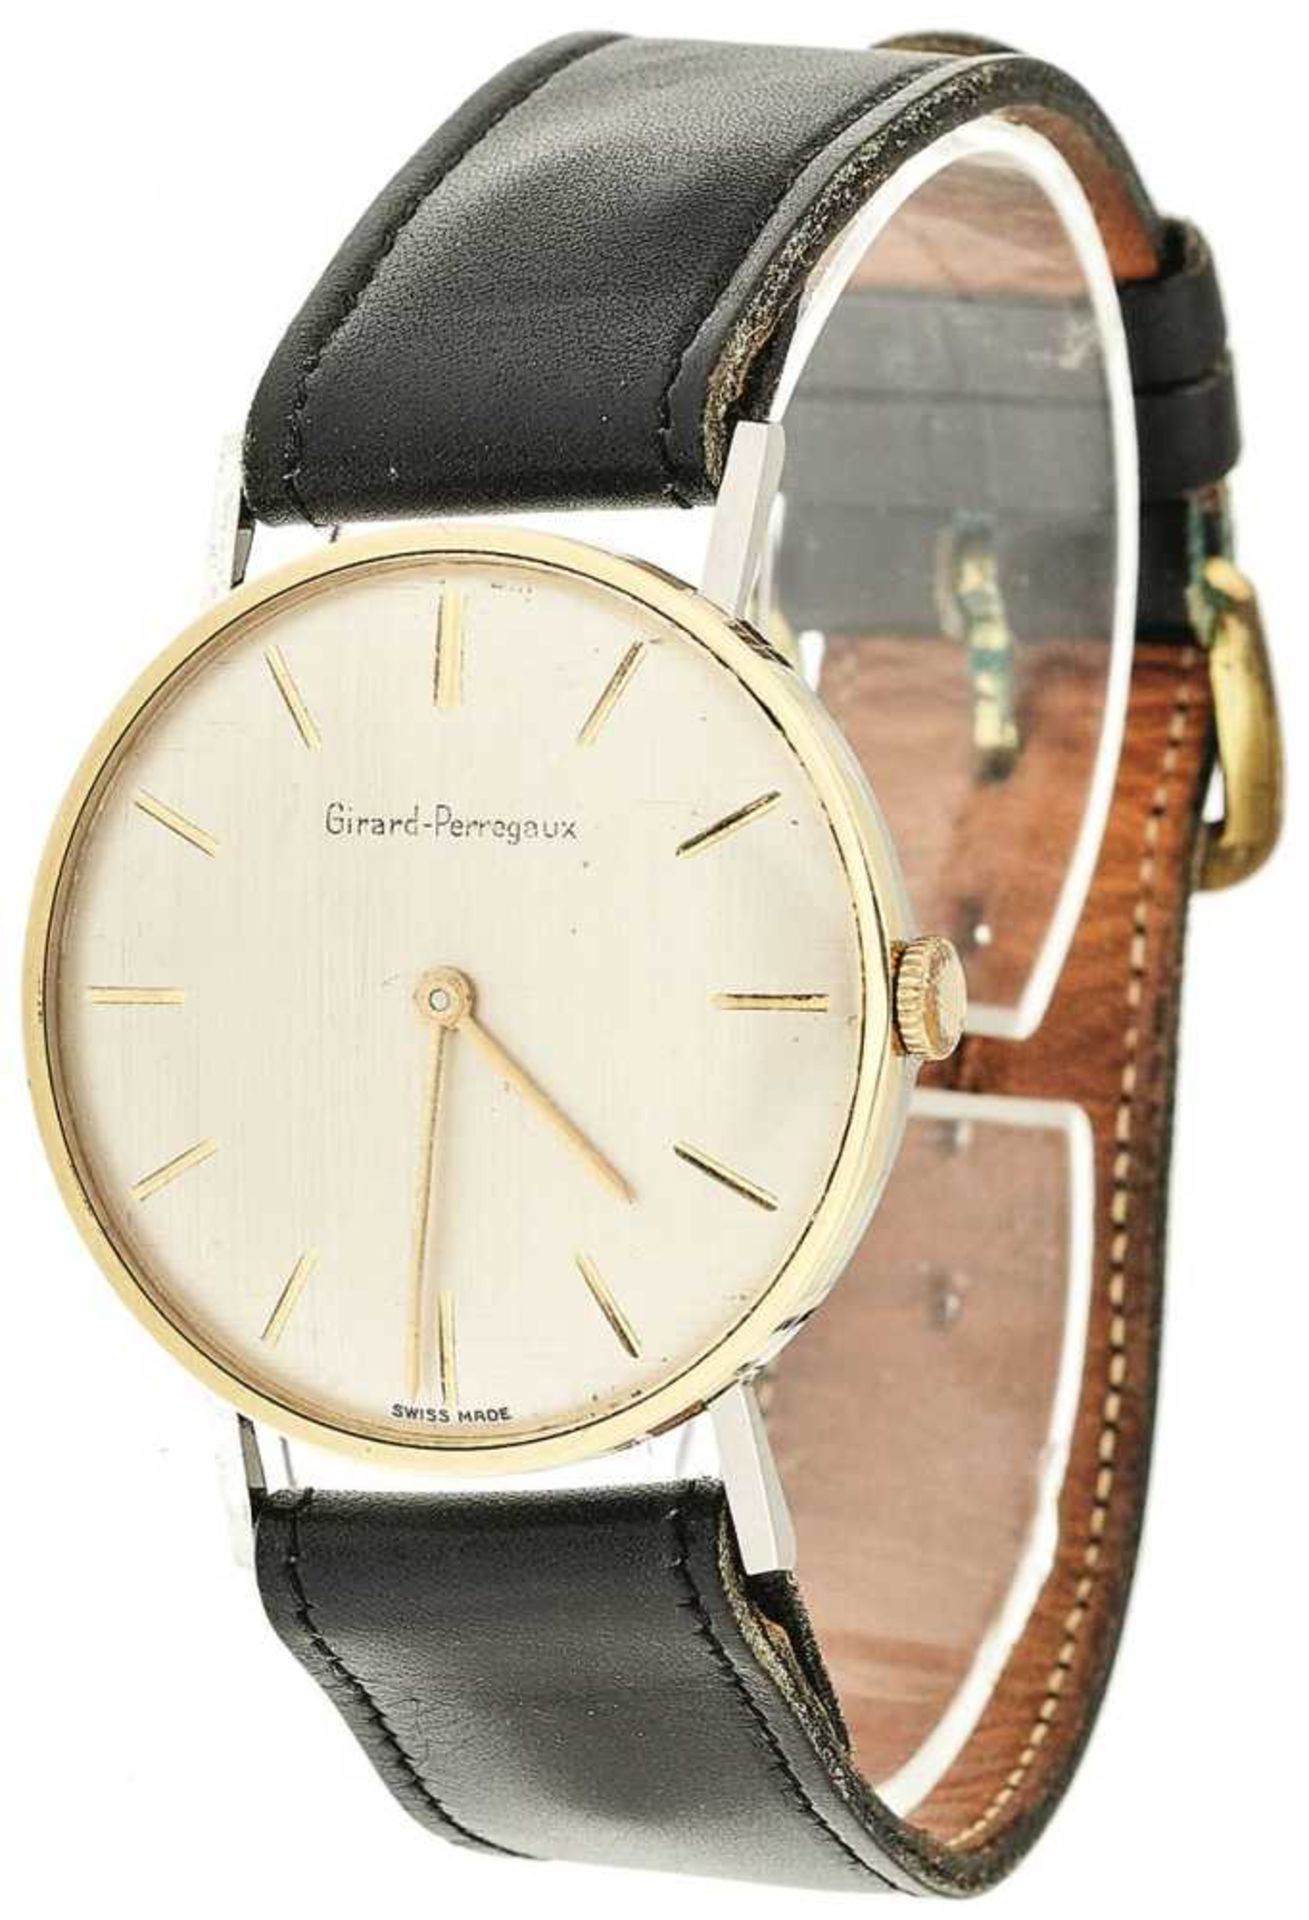 Girard Perregaux wrist watch. Middle of the 20th century, Switzerland. Bicolor, leather bracelet, ma